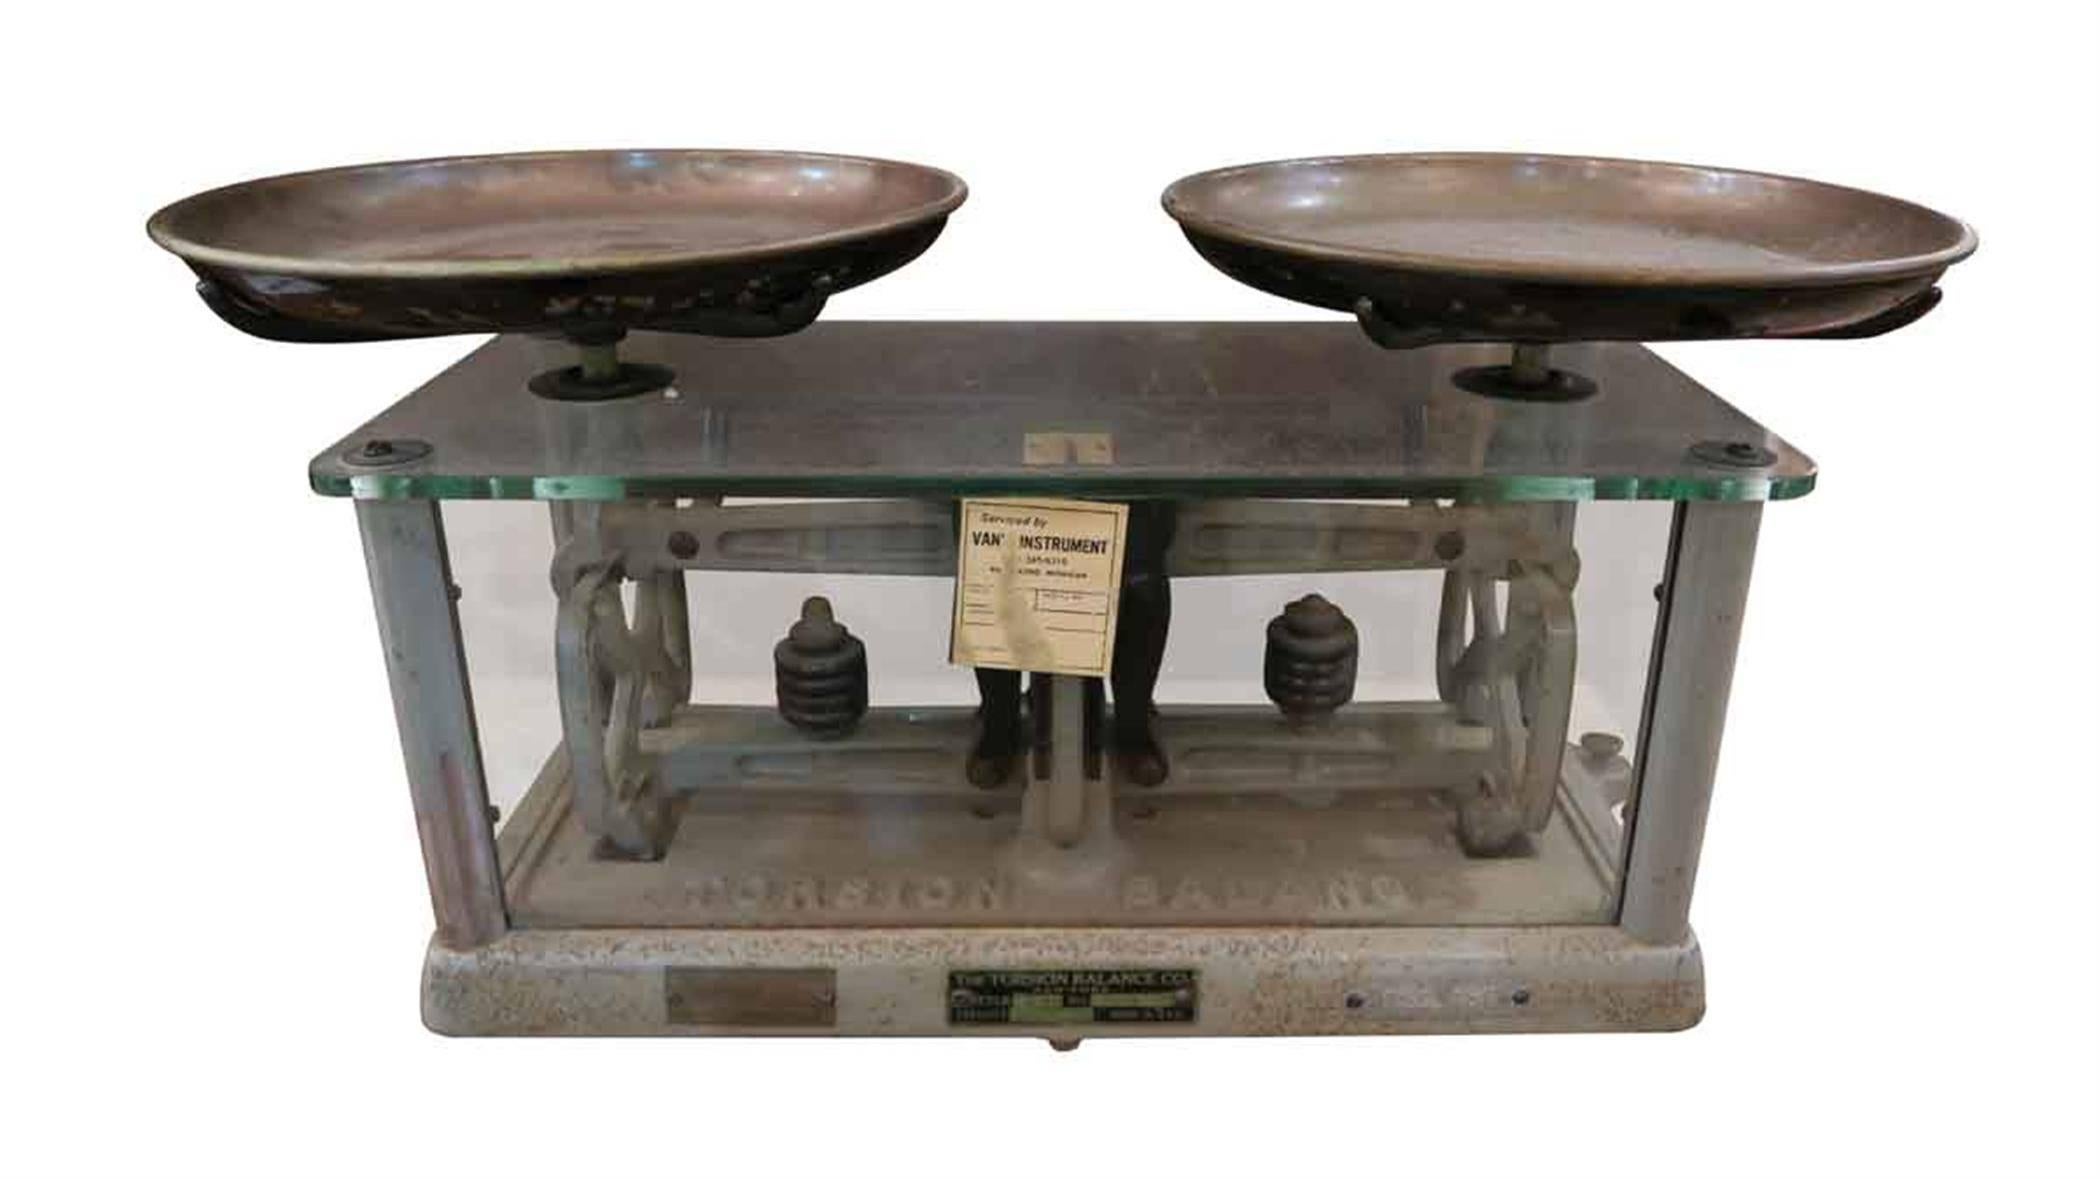 Made of glass, cast iron and brass. Made in the 1950s by The Torsion Balance Co. Made in USA. Style 253. This scale has a capacity of 10 pounds, a sensitiveness of three grains, and a graduated beam in front. It was extensively used for routine work